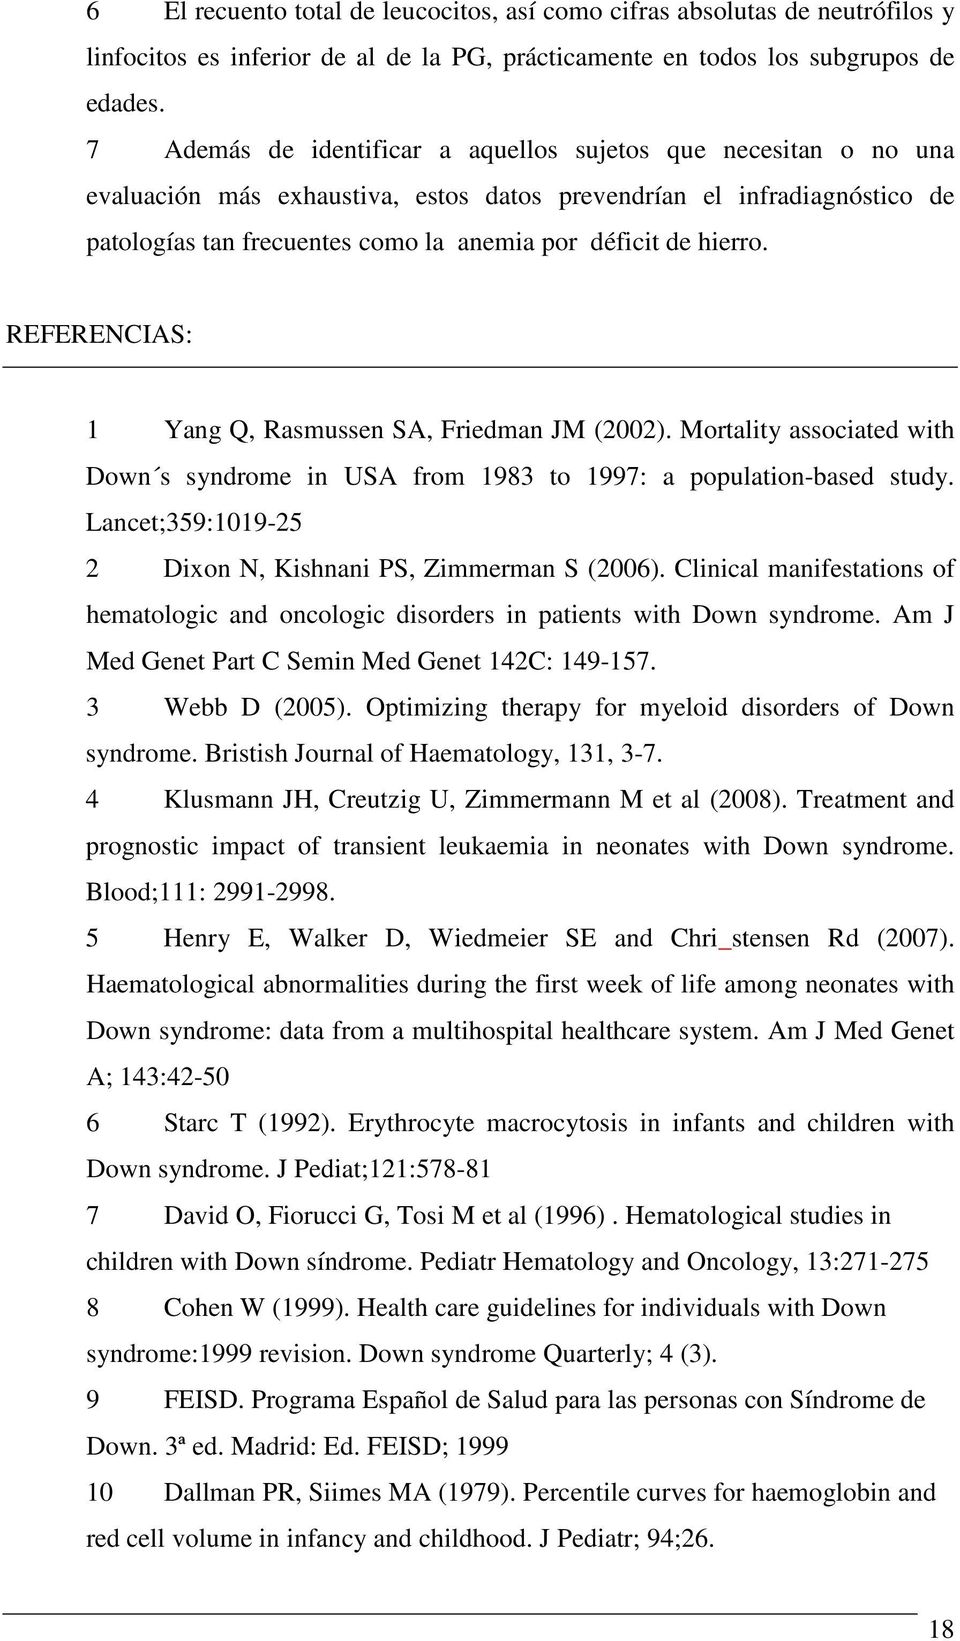 hierro. REFERENCIAS: 1 Yang Q, Rasmussen SA, Friedman JM (2002). Mortality associated with Down s syndrome in USA from 1983 to 1997: a population-based study.